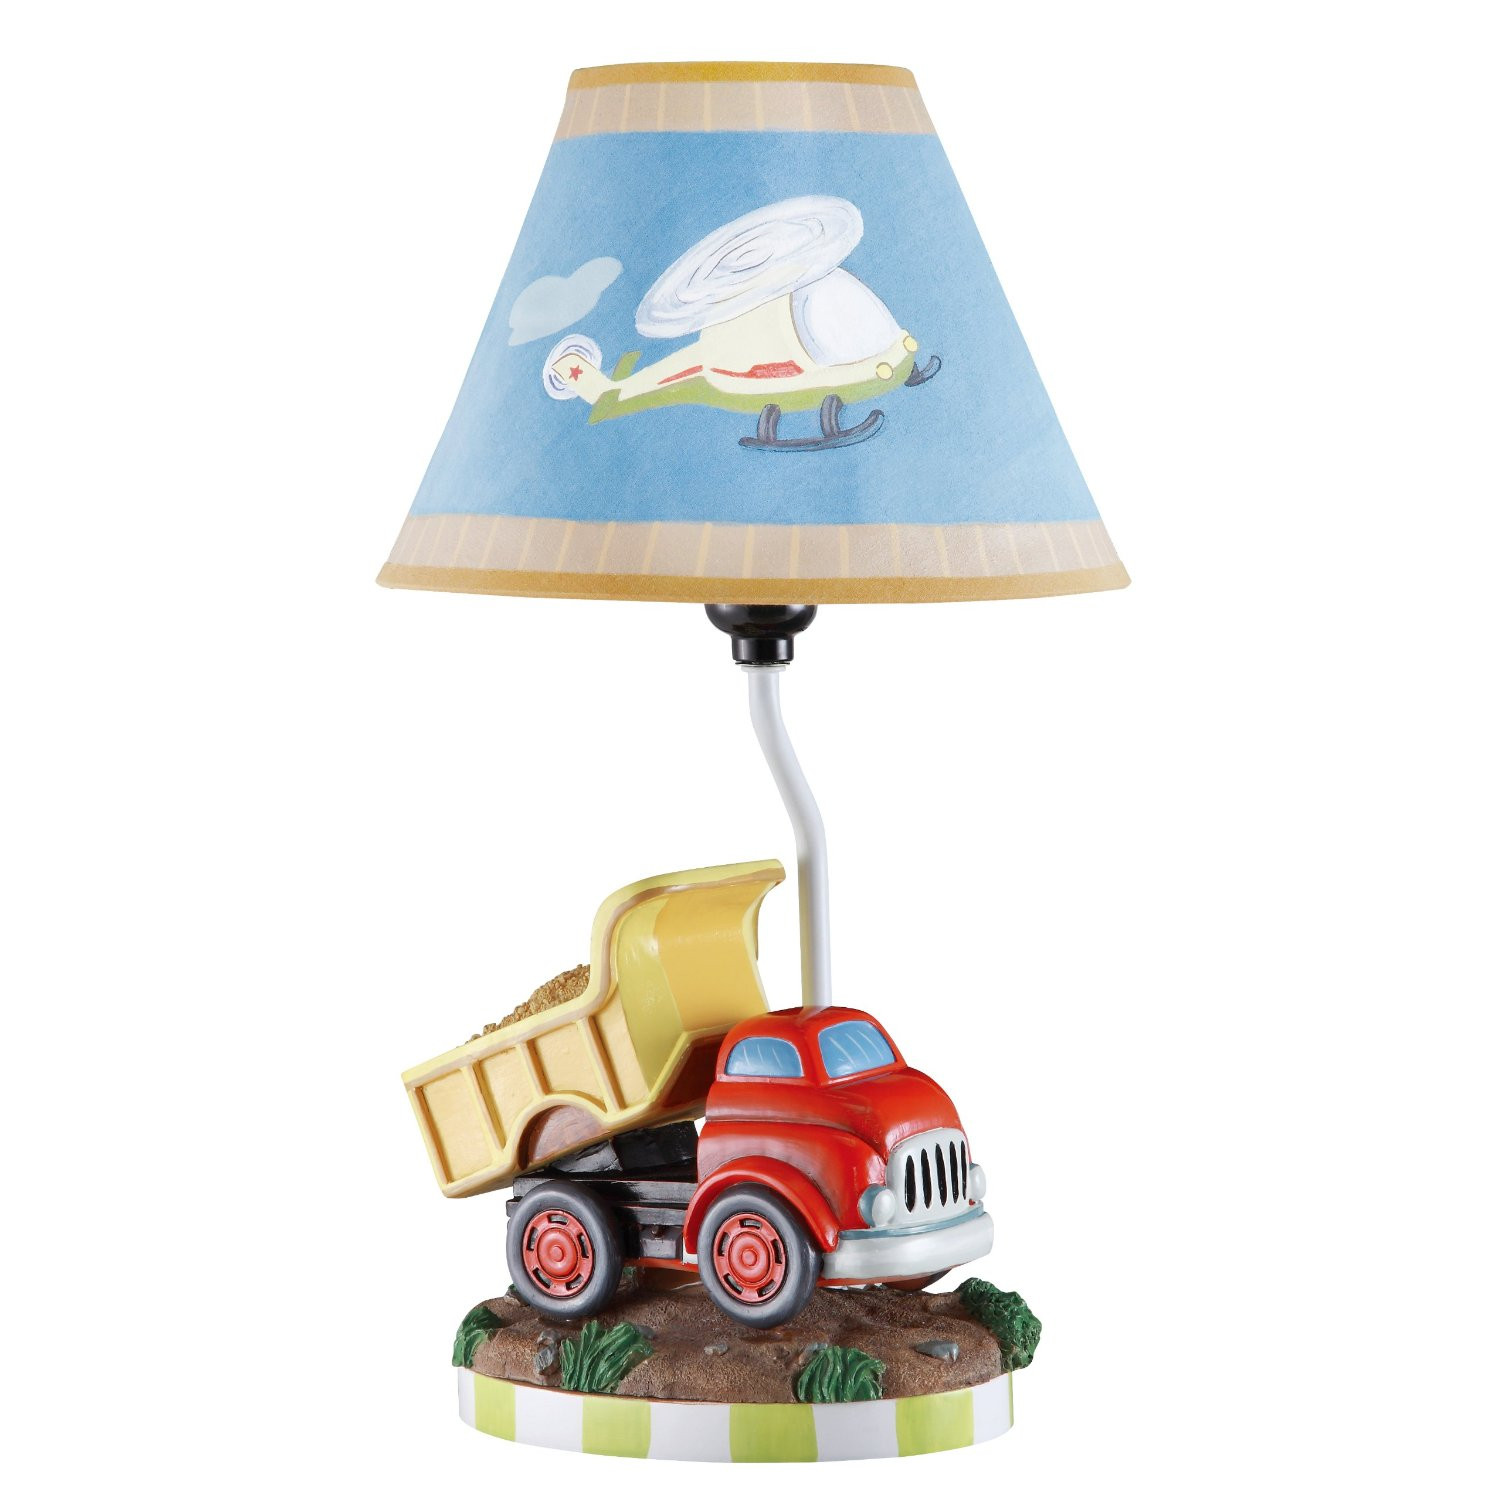 Boys Bedroom Lamp
 Interesting Kids Lamps for Boys Make Great Fun at Your